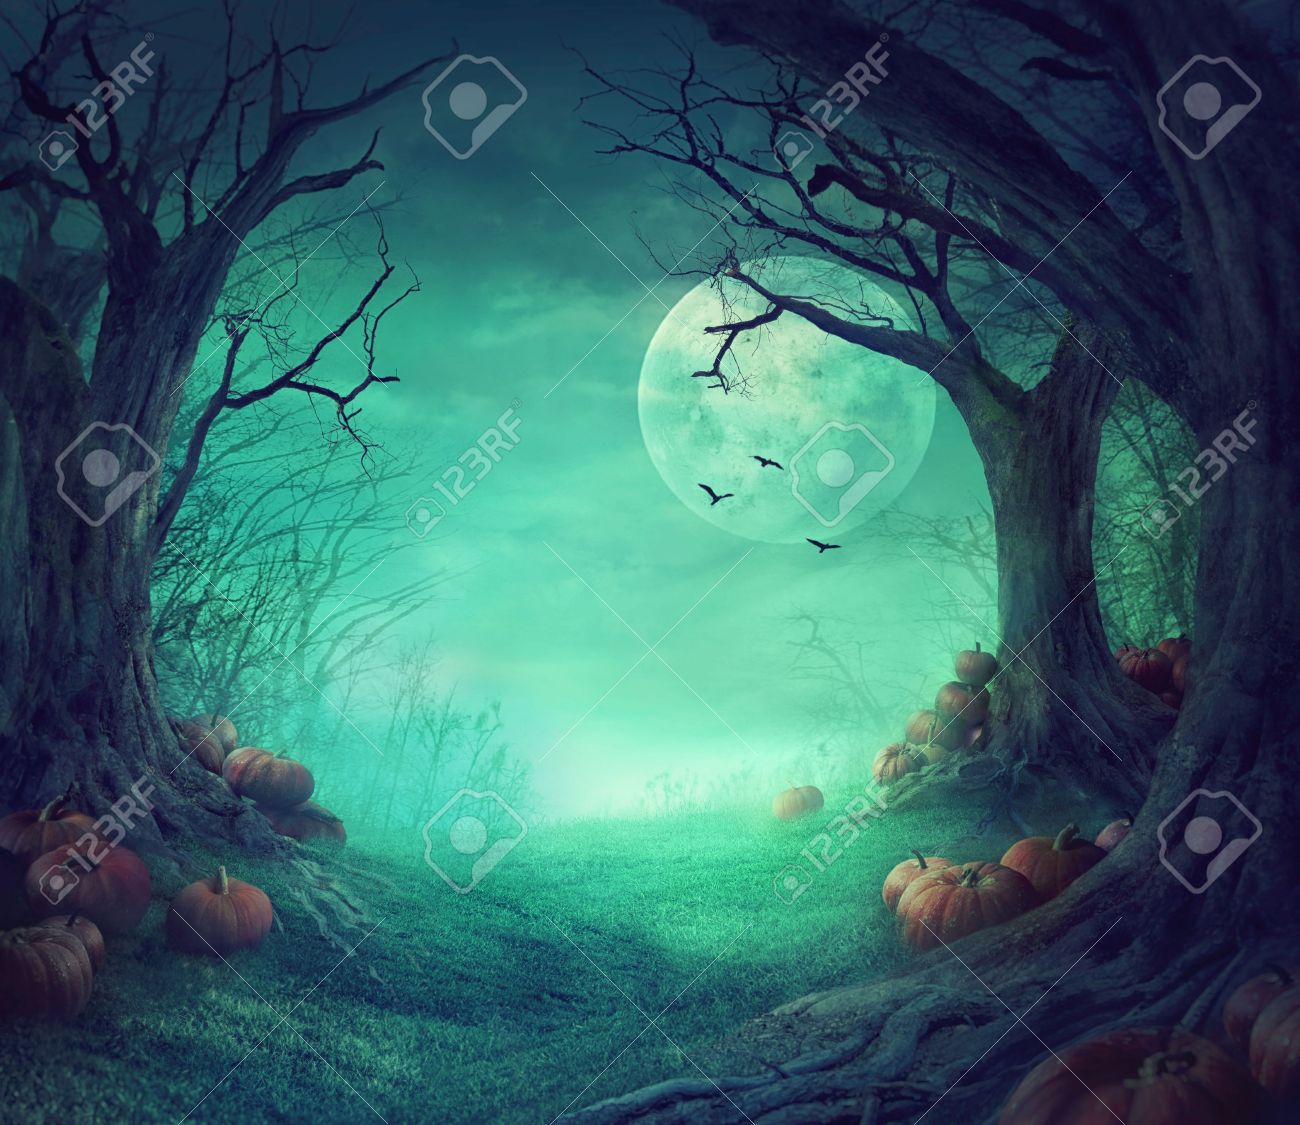 Halloween Background Spooky Forest With Dead Trees And Pumpkins